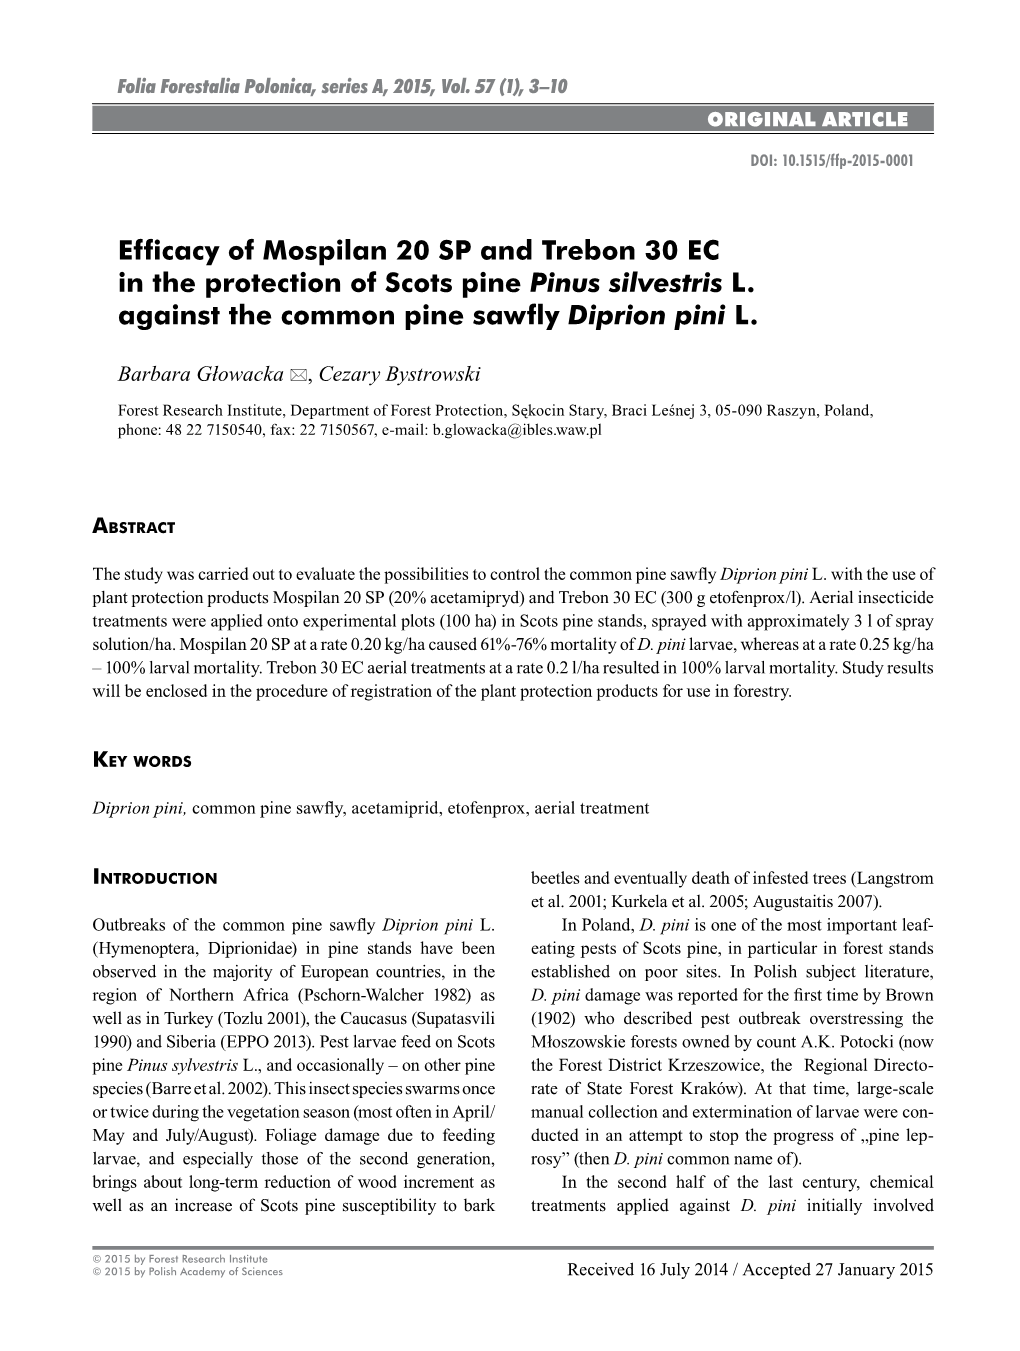 Efficacy of Mospilan 20 SP and Trebon 30 EC in the Protection of Scots Pine Pinus Silvestris L. Against the Common Pine Sawfly D